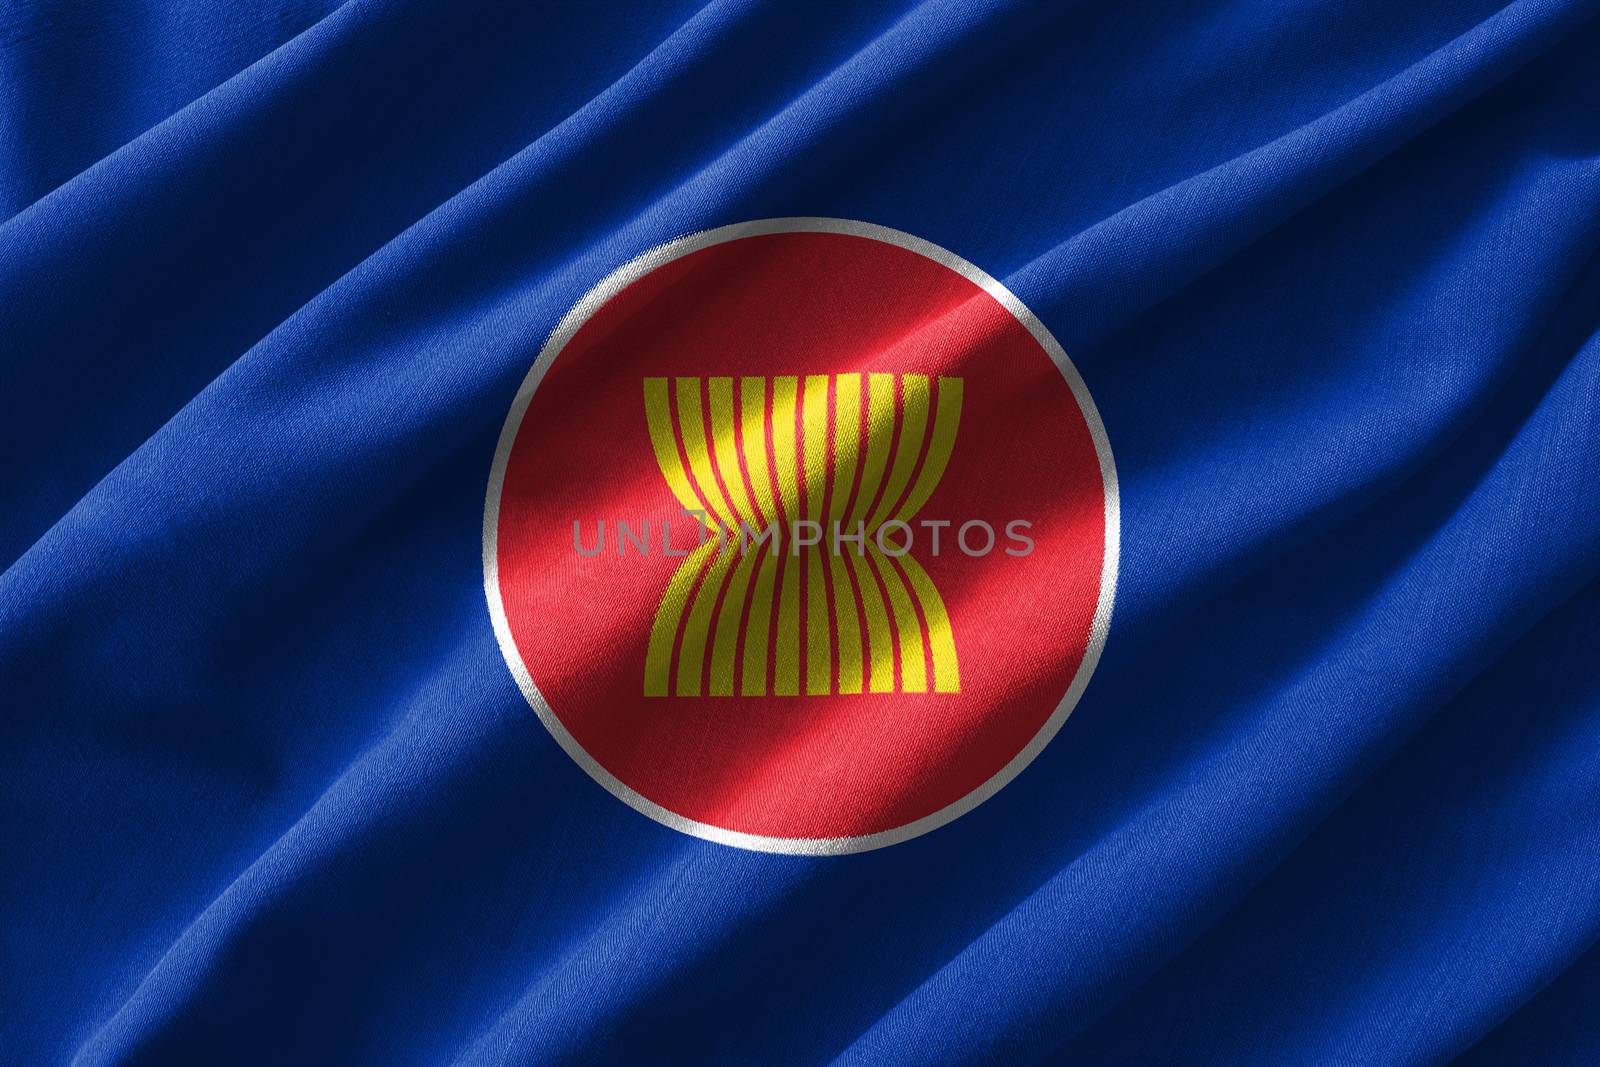 ASEAN flag painting on high detail of wave cotton fabrics . 3D illustration .